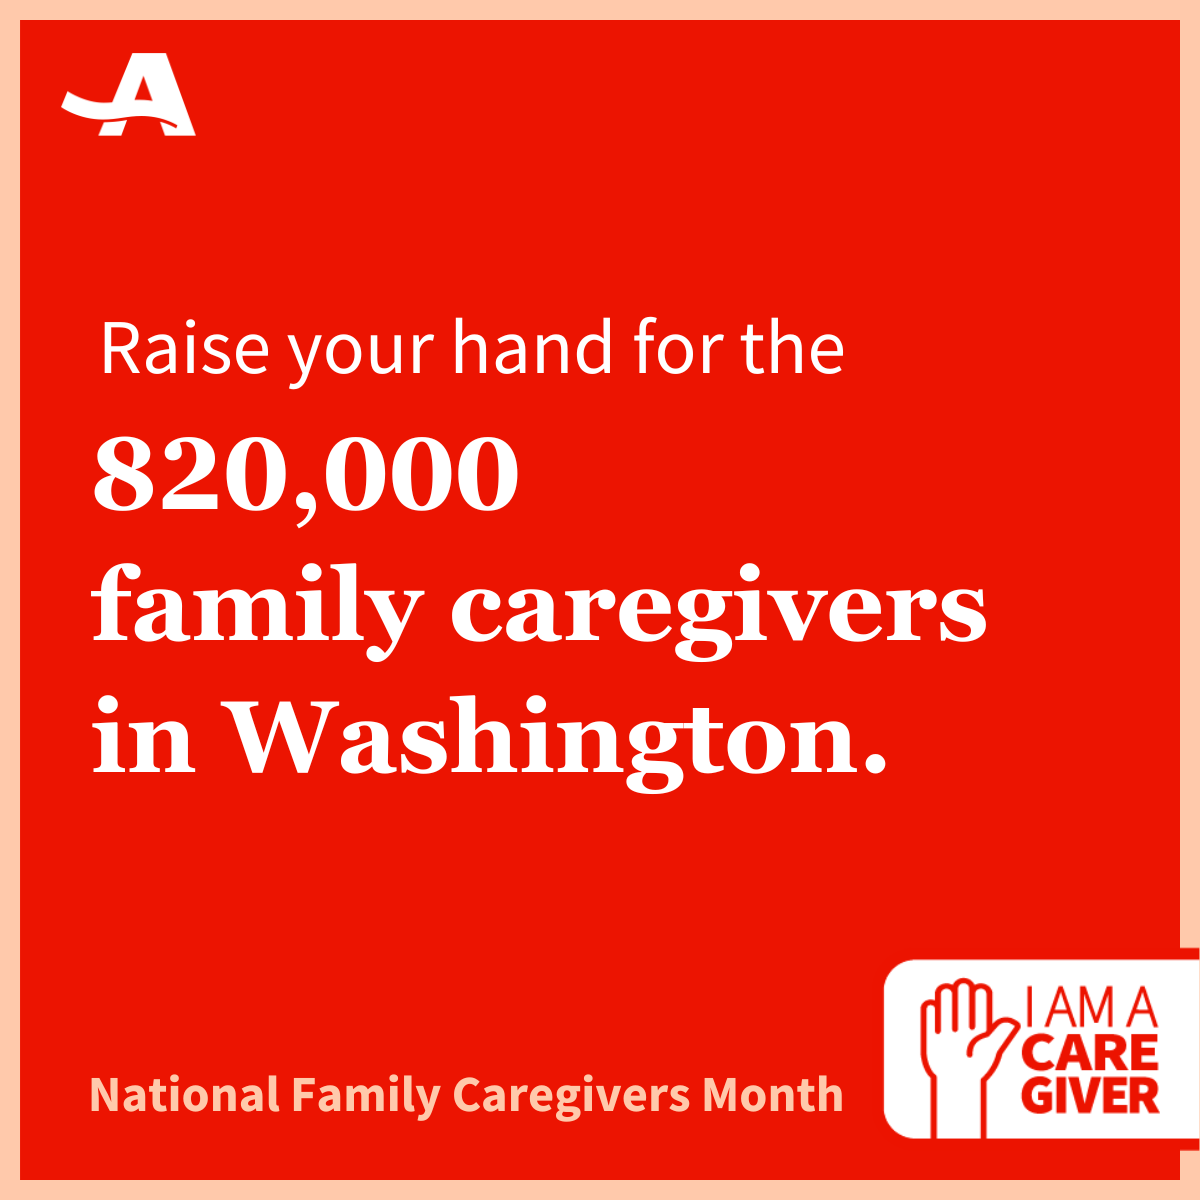 A banner that says "Raise Your hand for the 820,000 family caregivers in Washington.